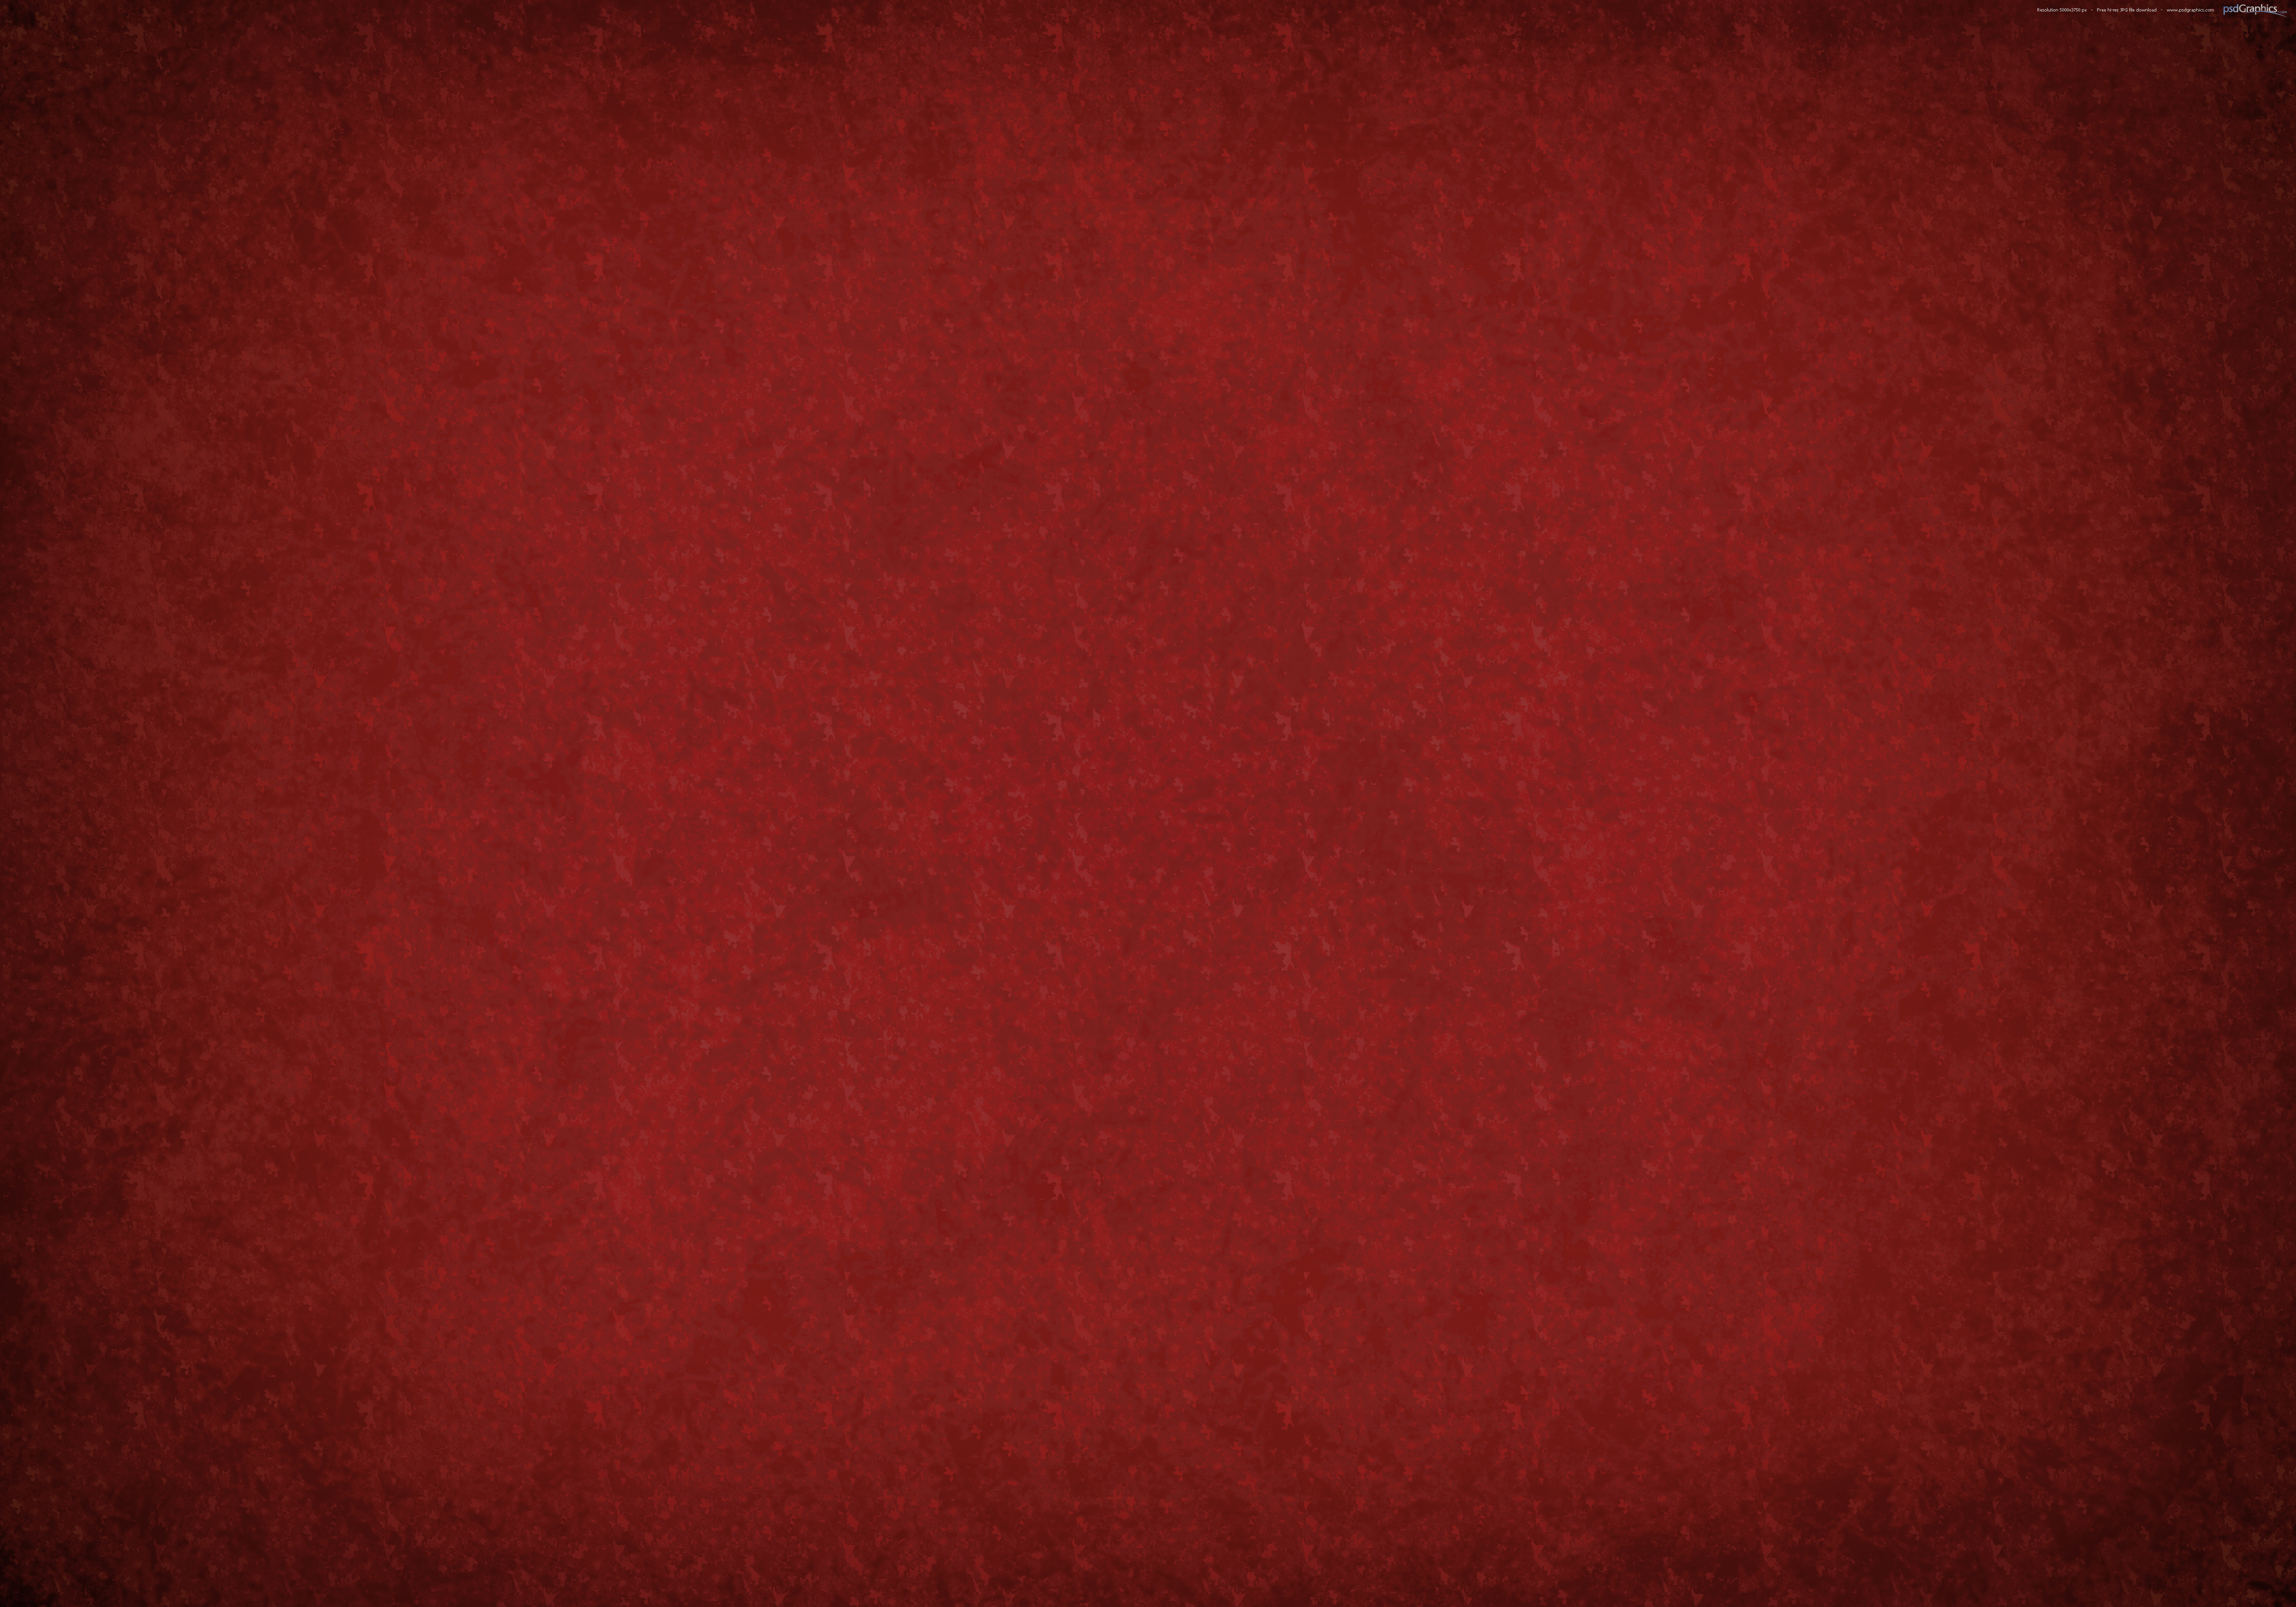 Red And Brown Grunge Background Psdgraphics